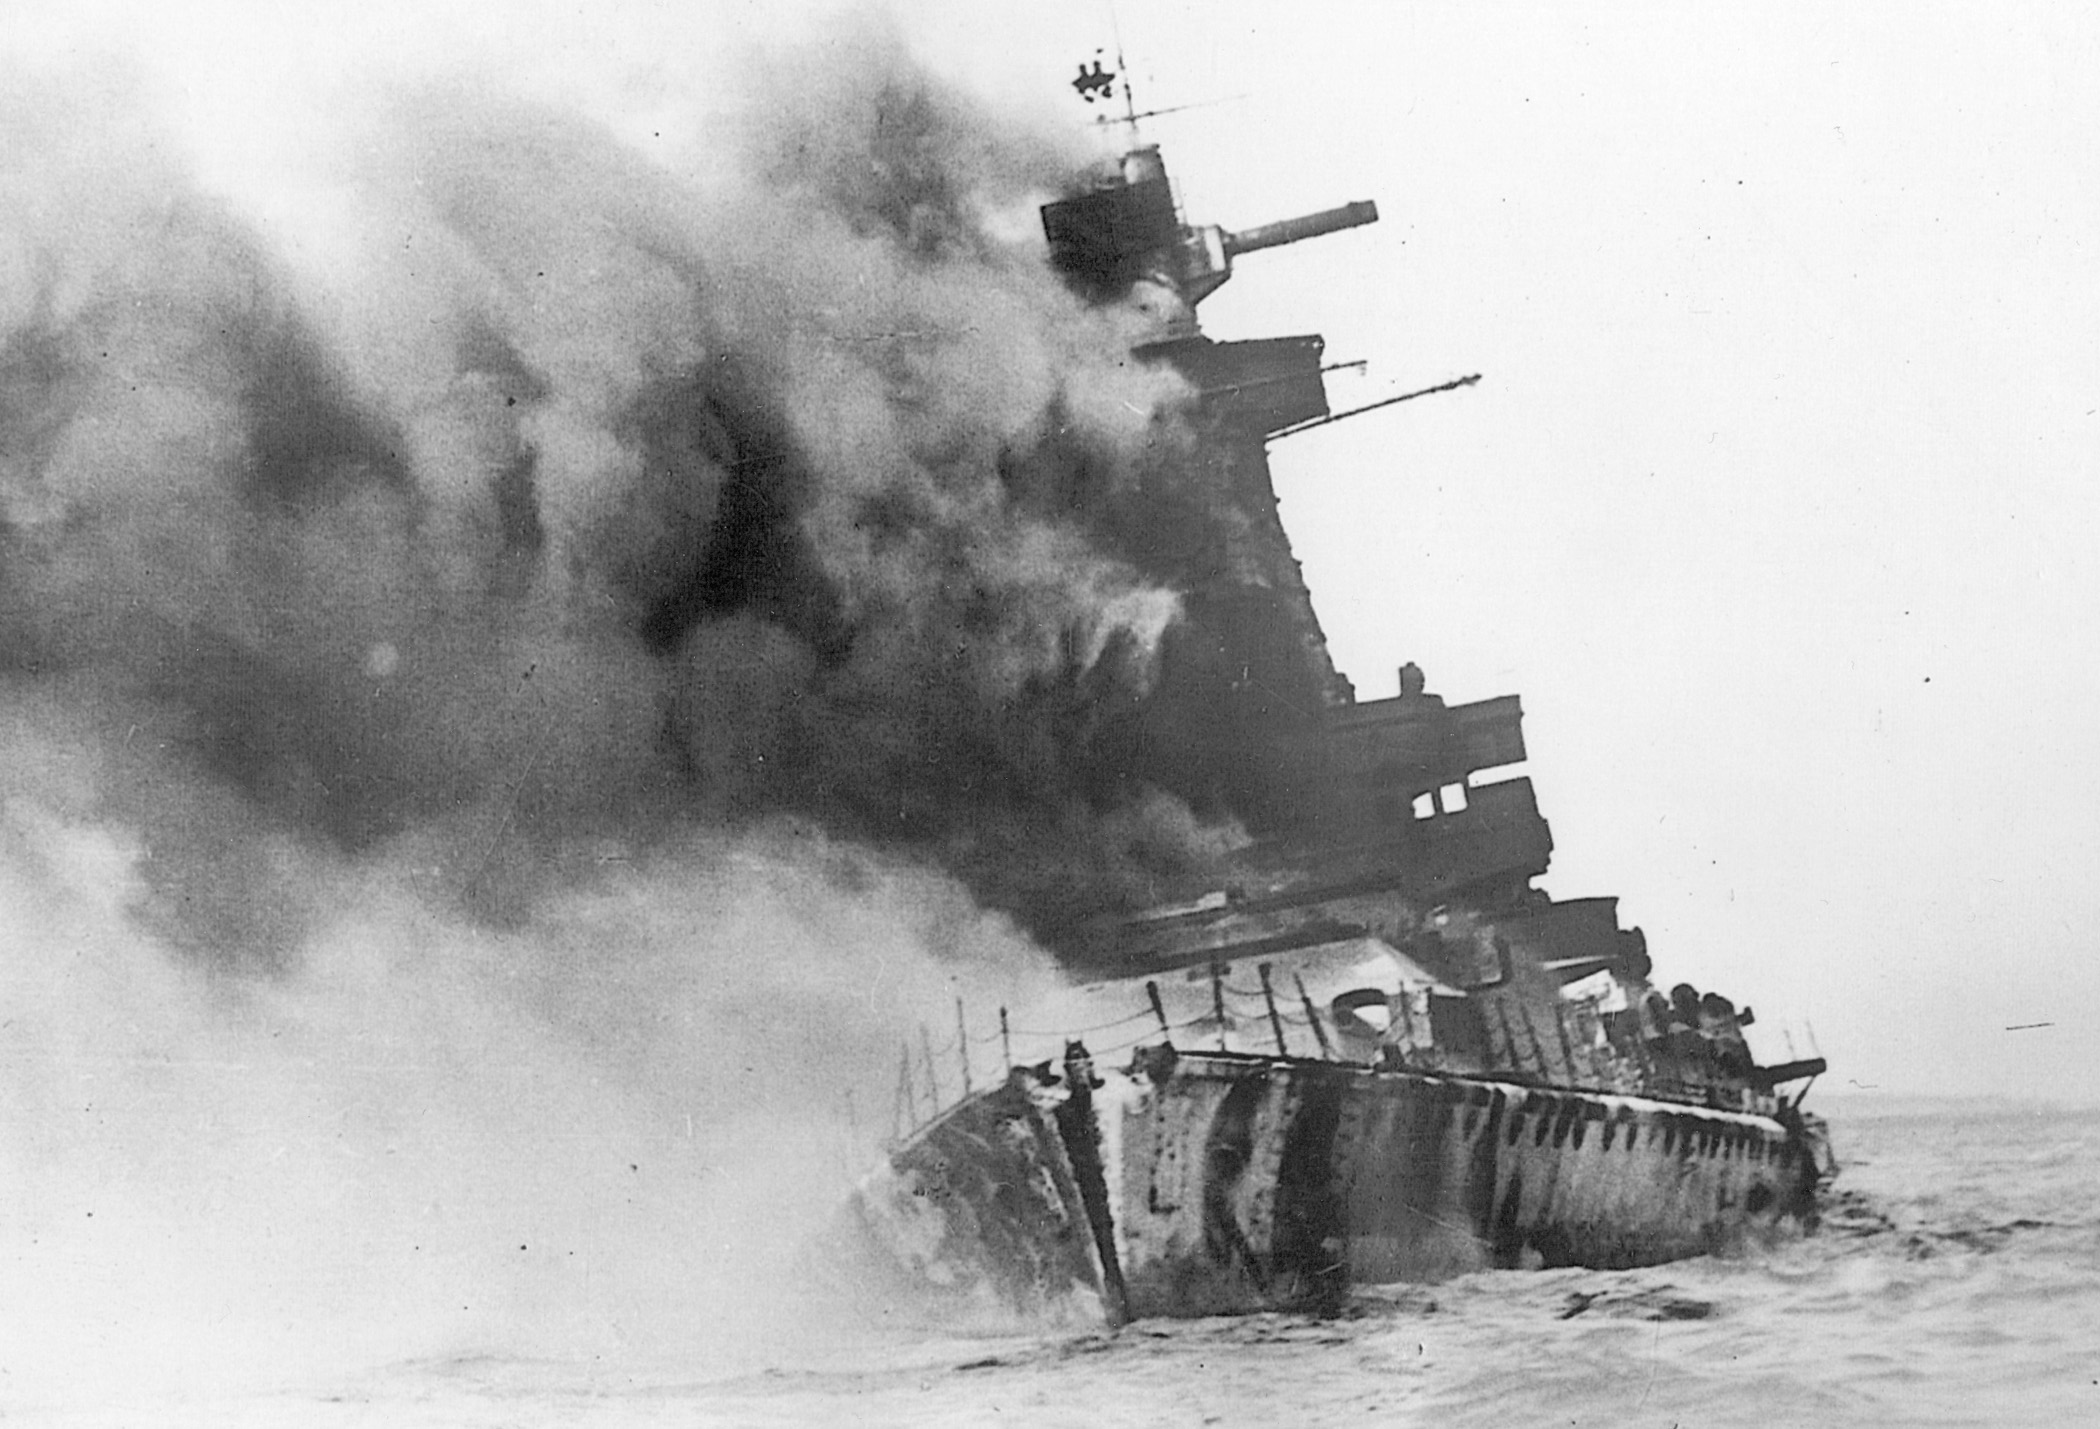 British shellfire caused a huge tear in the bows of the Graf Spee, and she was eventually scuttled to prevent her capture.